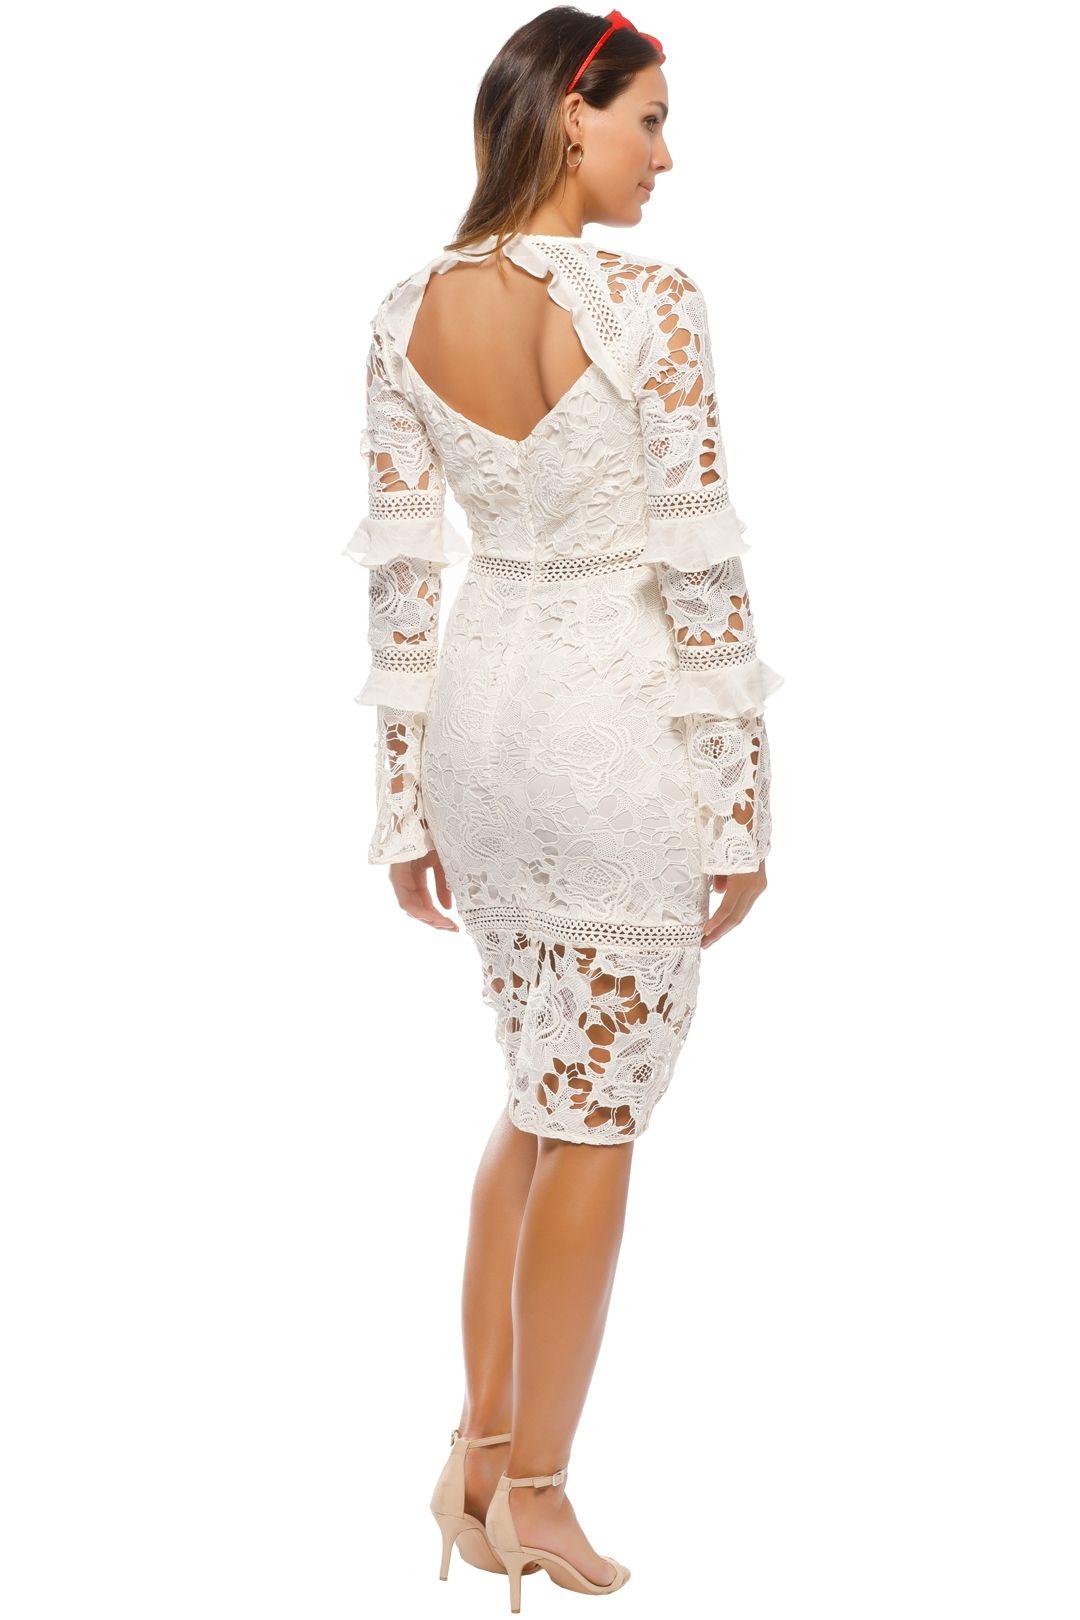 Cooper St - Lustrous Lace Long Sleeve - Ivory - Back